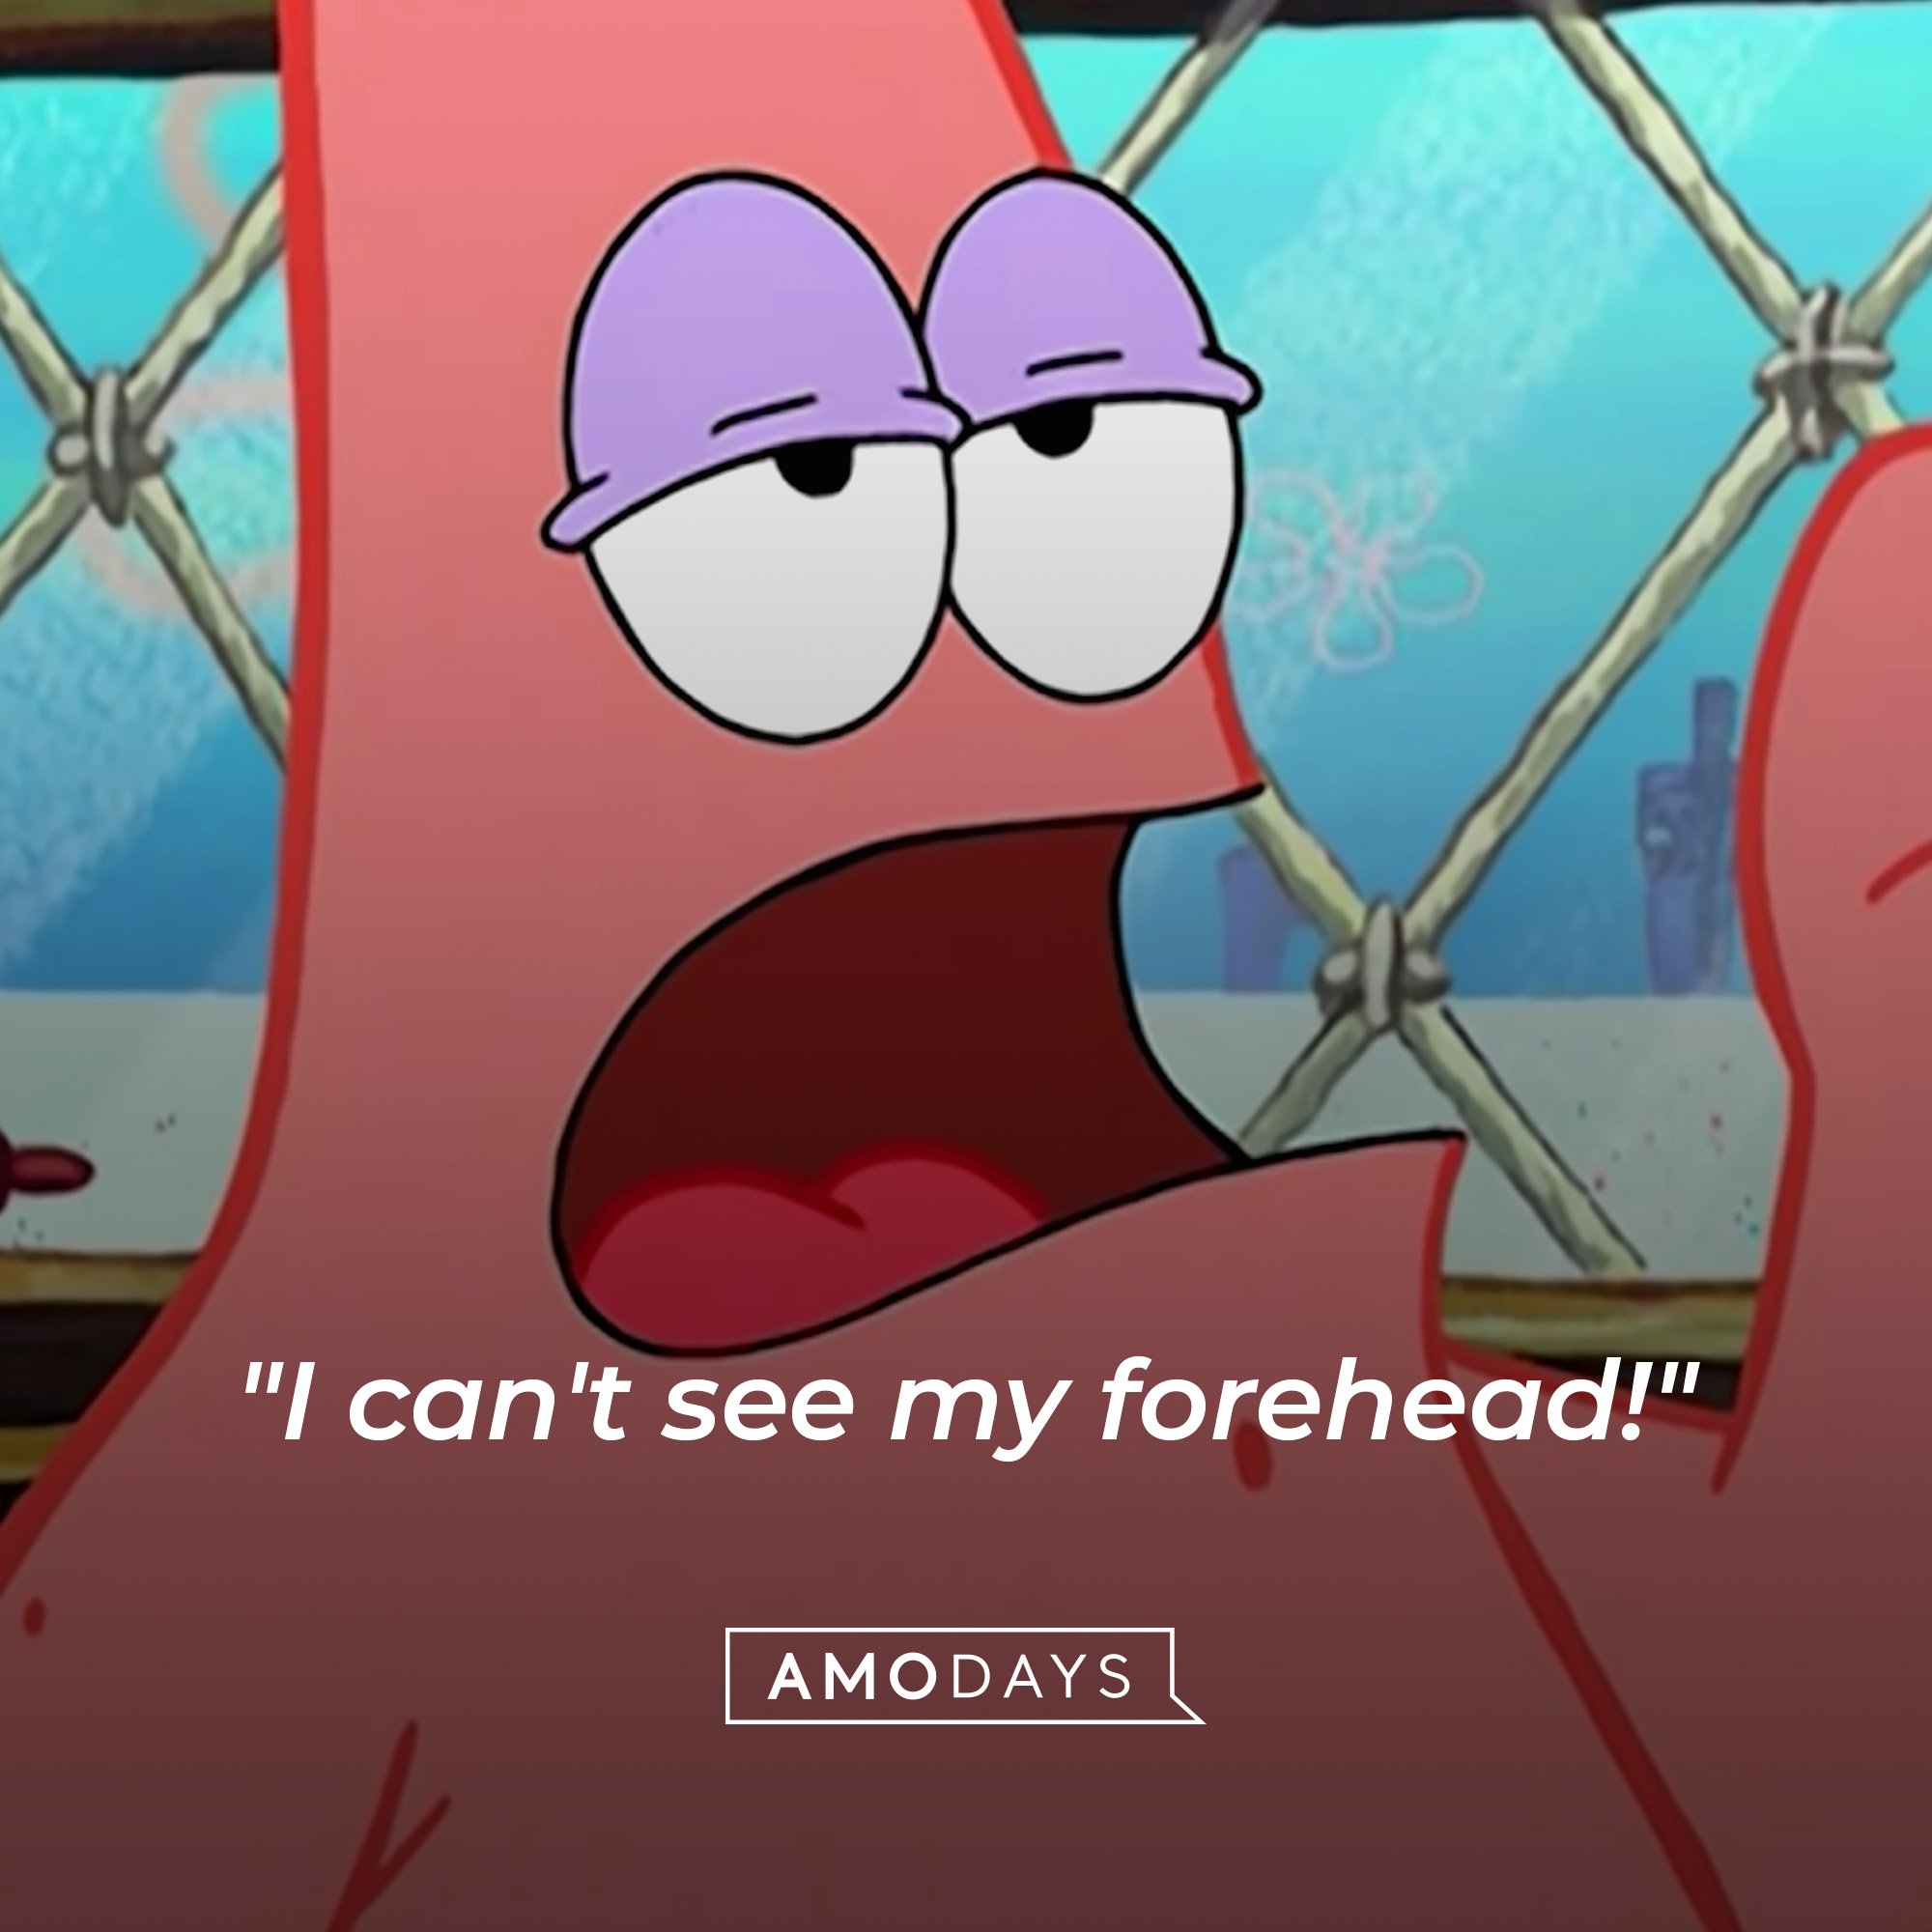 Patrick Star’s quote: "I can't see my forehead!" | Image: AmoDays